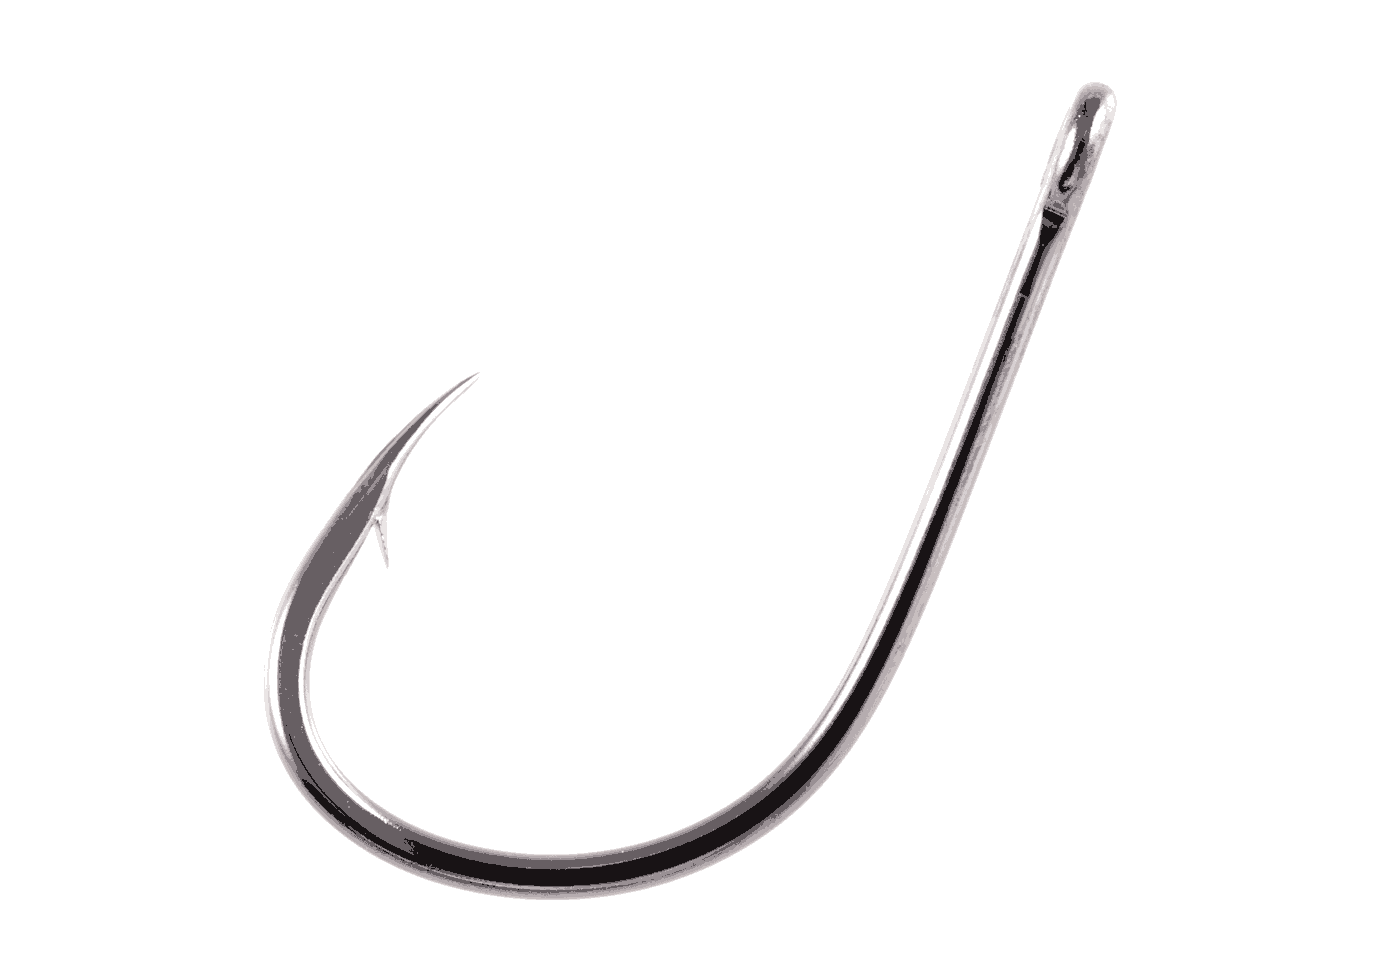 OWNER HOOKS SSW ALL PURPOSE BAIT 5311-191 SZ 9/0 QTY 17 SALTWATER BIG GAME FISH 